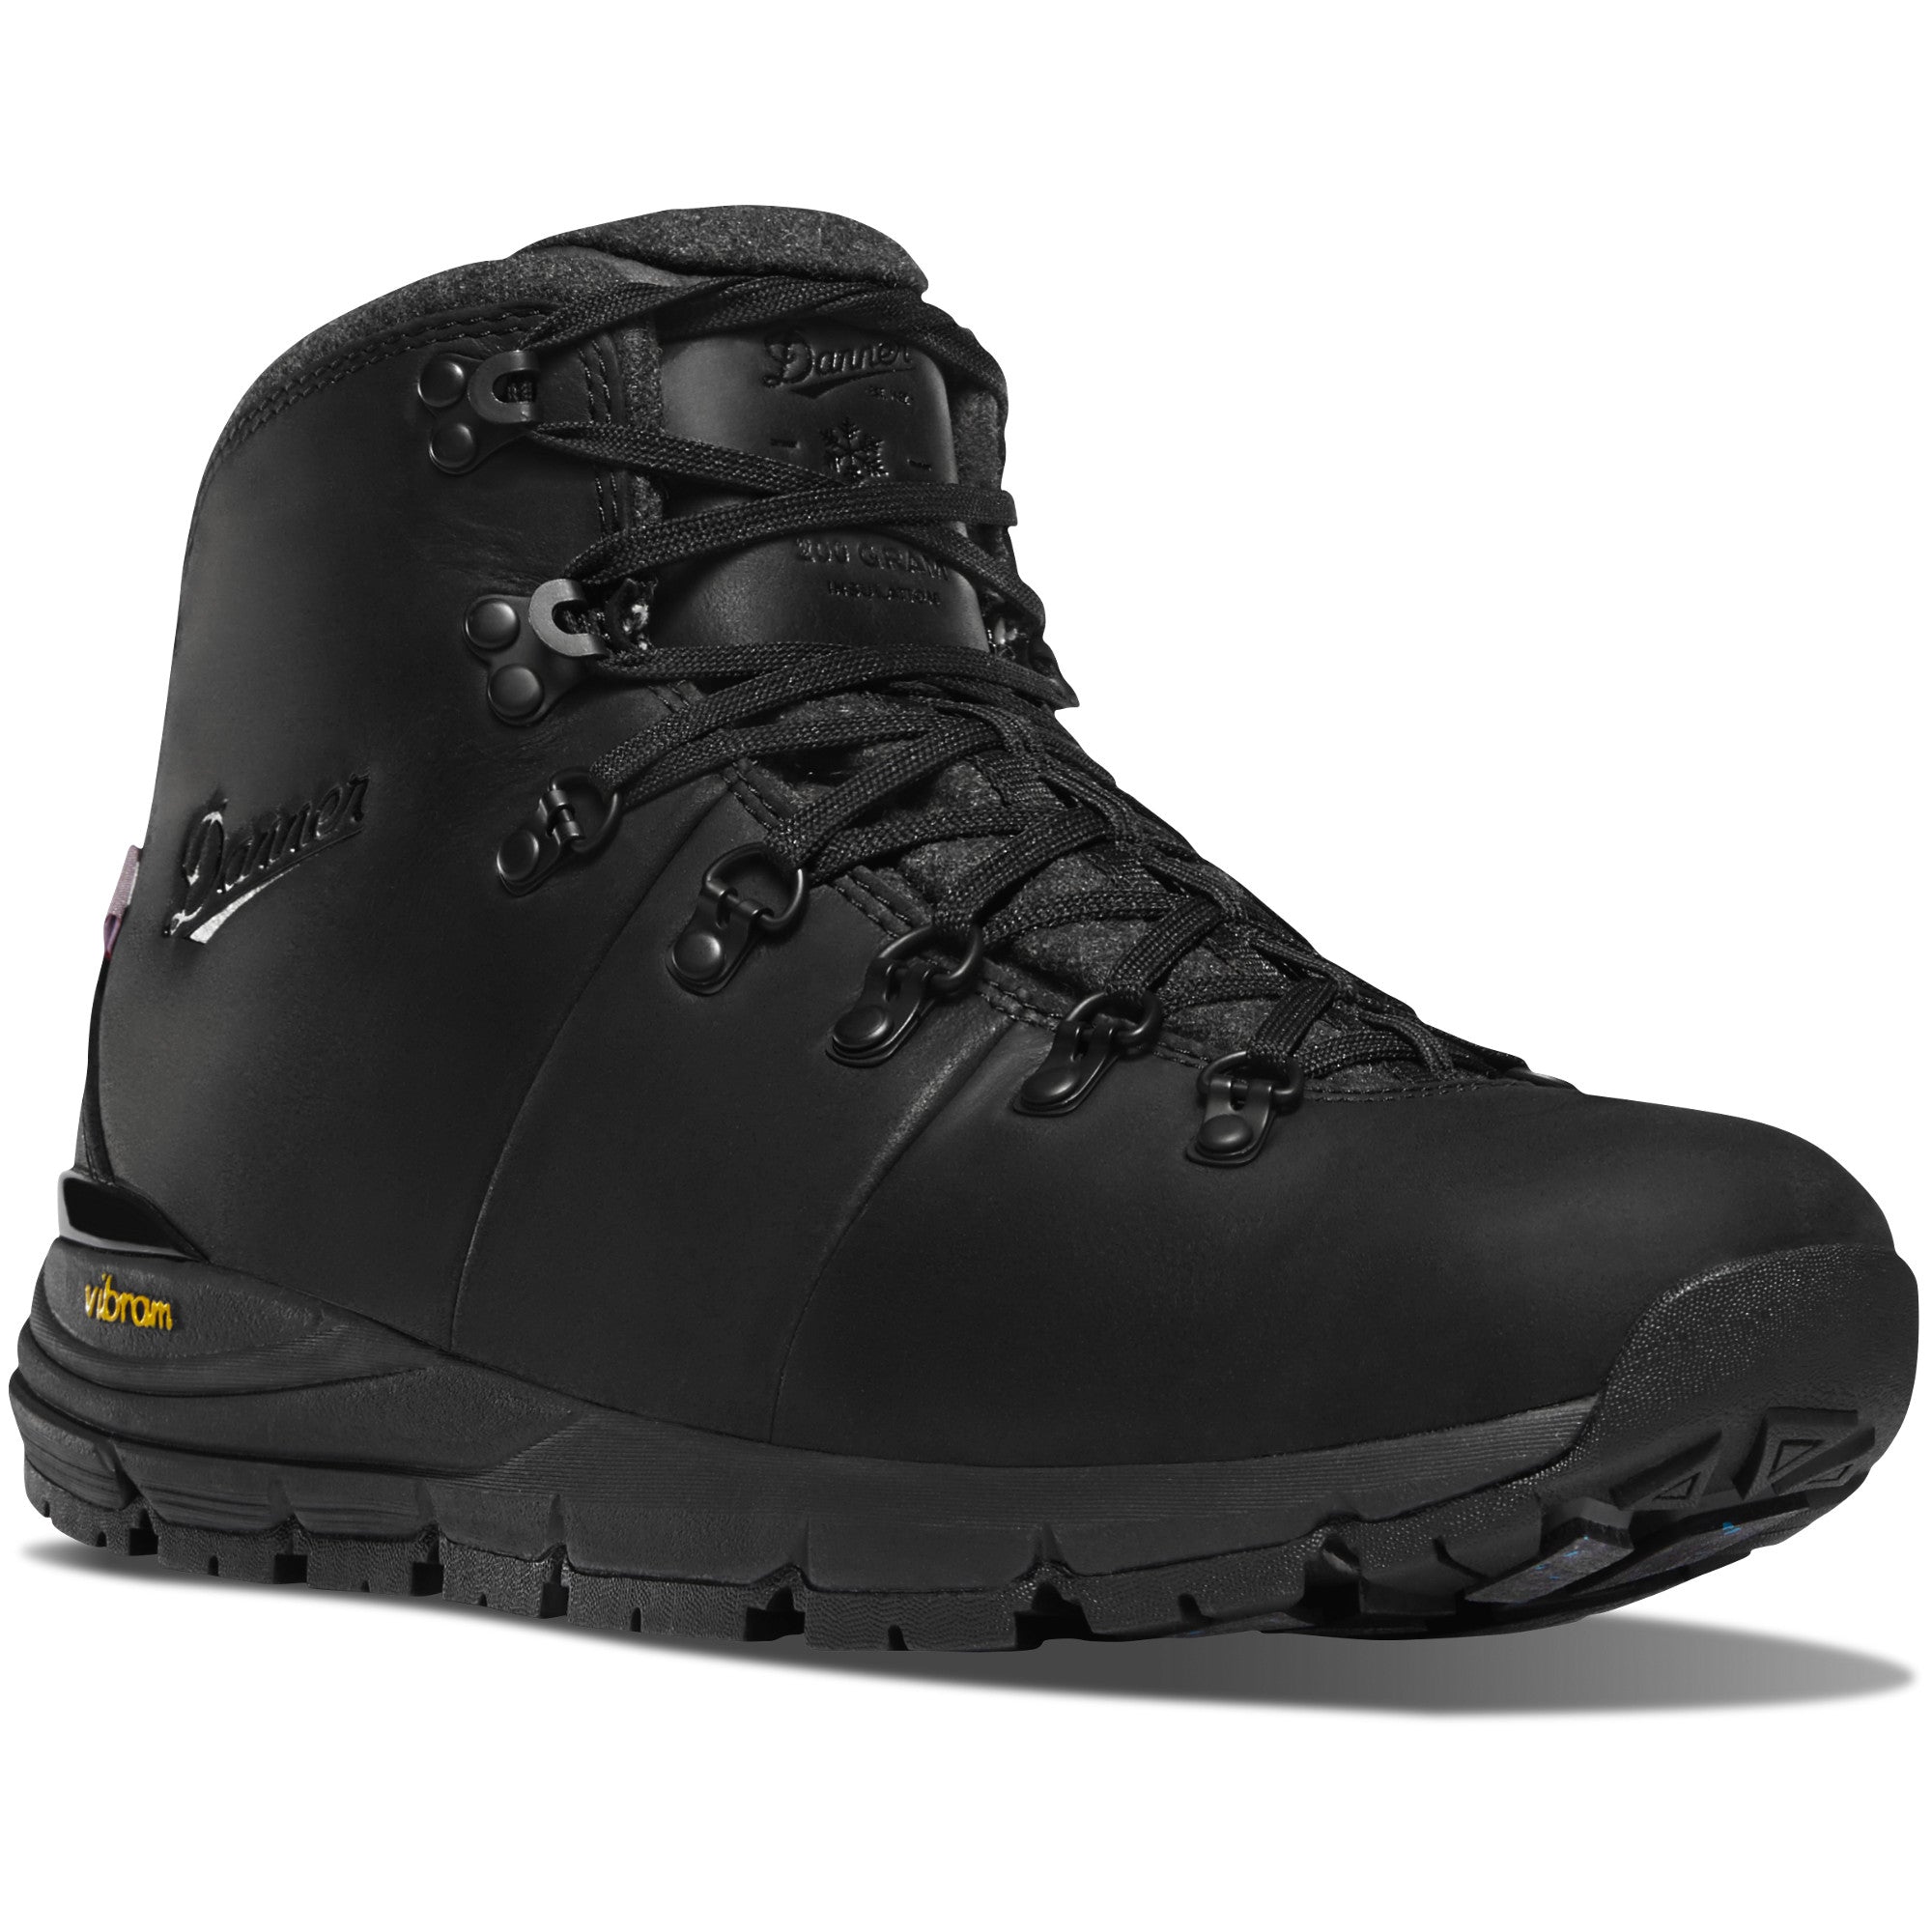 Danner Men's Mountain 600 4.5" 200G Waterproof Hiking Boot in Black from the side